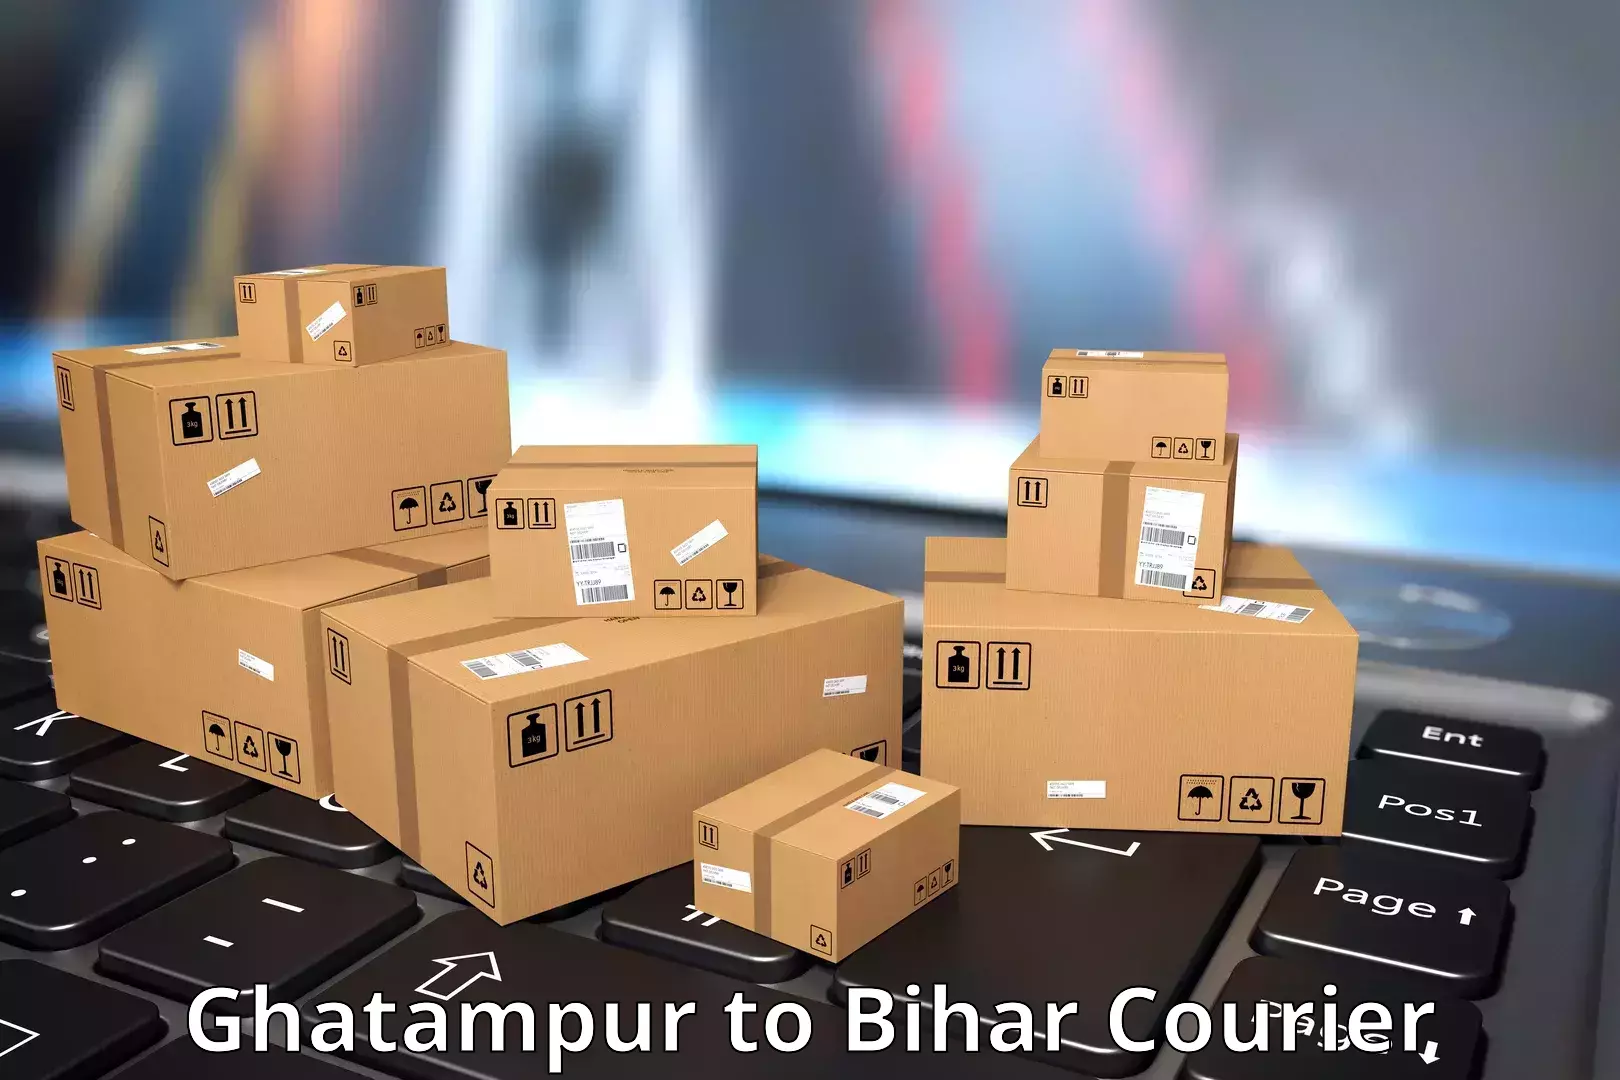 Courier service partnerships Ghatampur to Bankipore